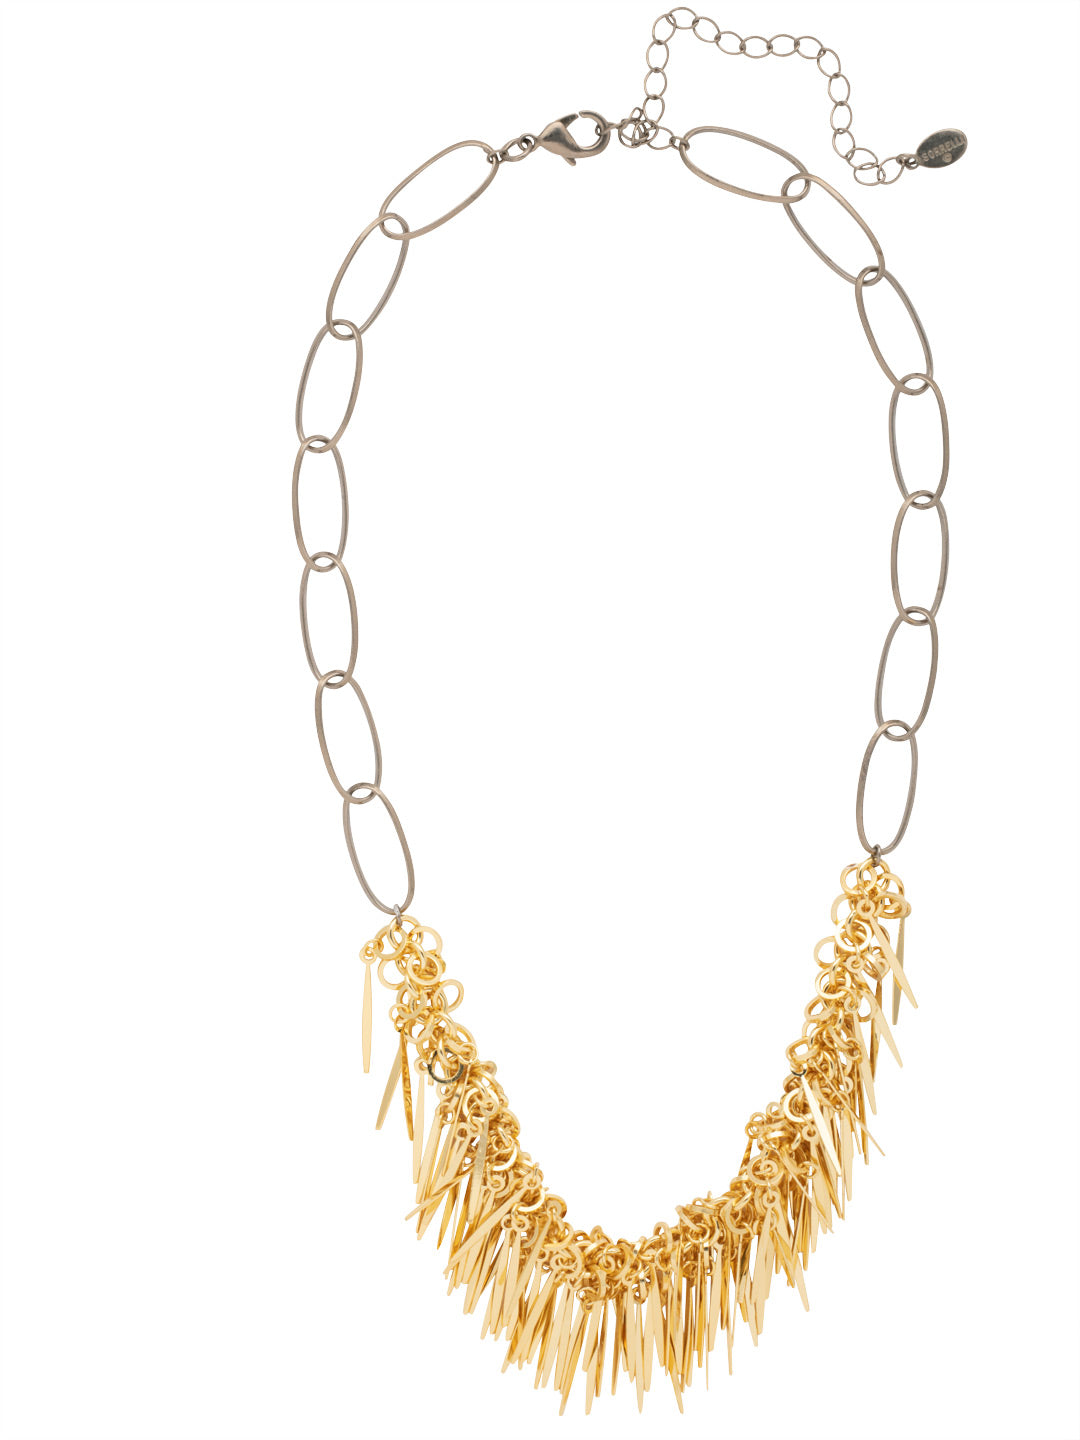 Georgina Statement Necklace - 4NFC7MXMTL - <p>The Georgina Statement Necklace features fringe dangles on an adjustable oval link chain, secured with a lobster claw clasp. From Sorrelli's Bare Metallic collection in our Mixed Metal finish.</p>